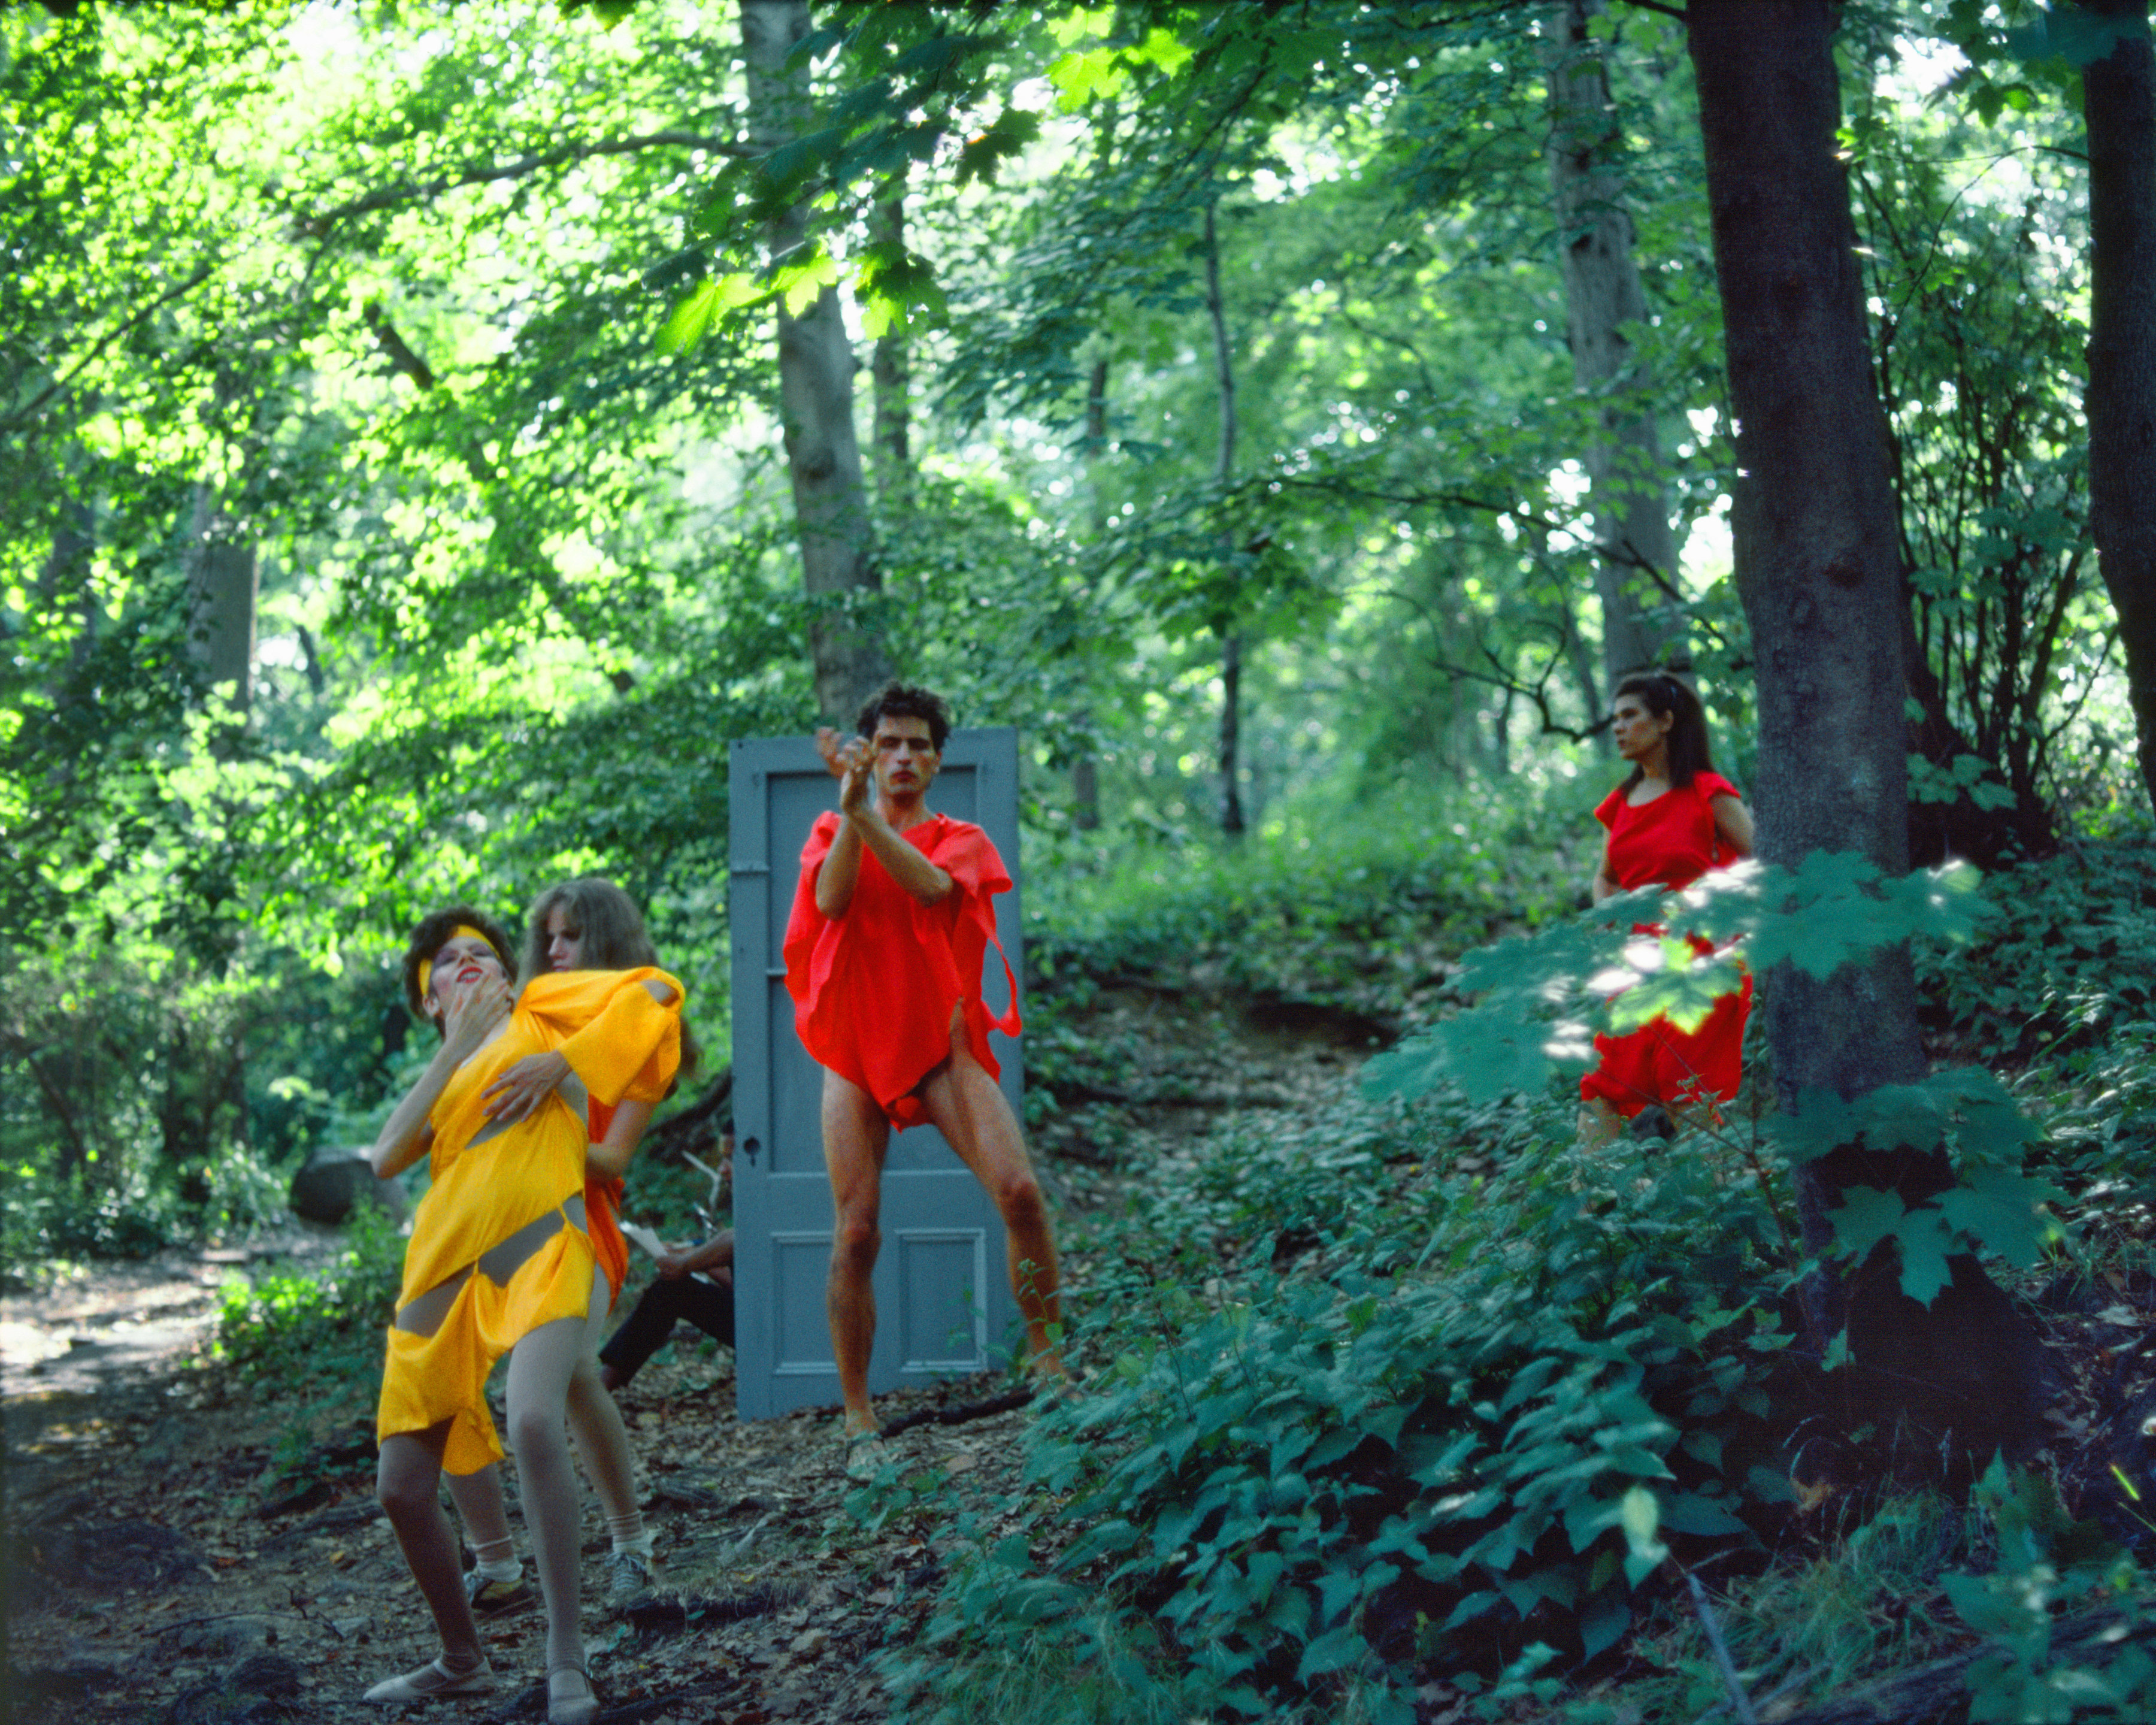 Rivers, First Draft: The Debauchees dance down the hill, the Woman in Red falls further behind, 1982/2015, Digital C-print from Kodachrome 35mm slides in 48 parts, 16h x 20w in (40.64h x 50.80w cm)